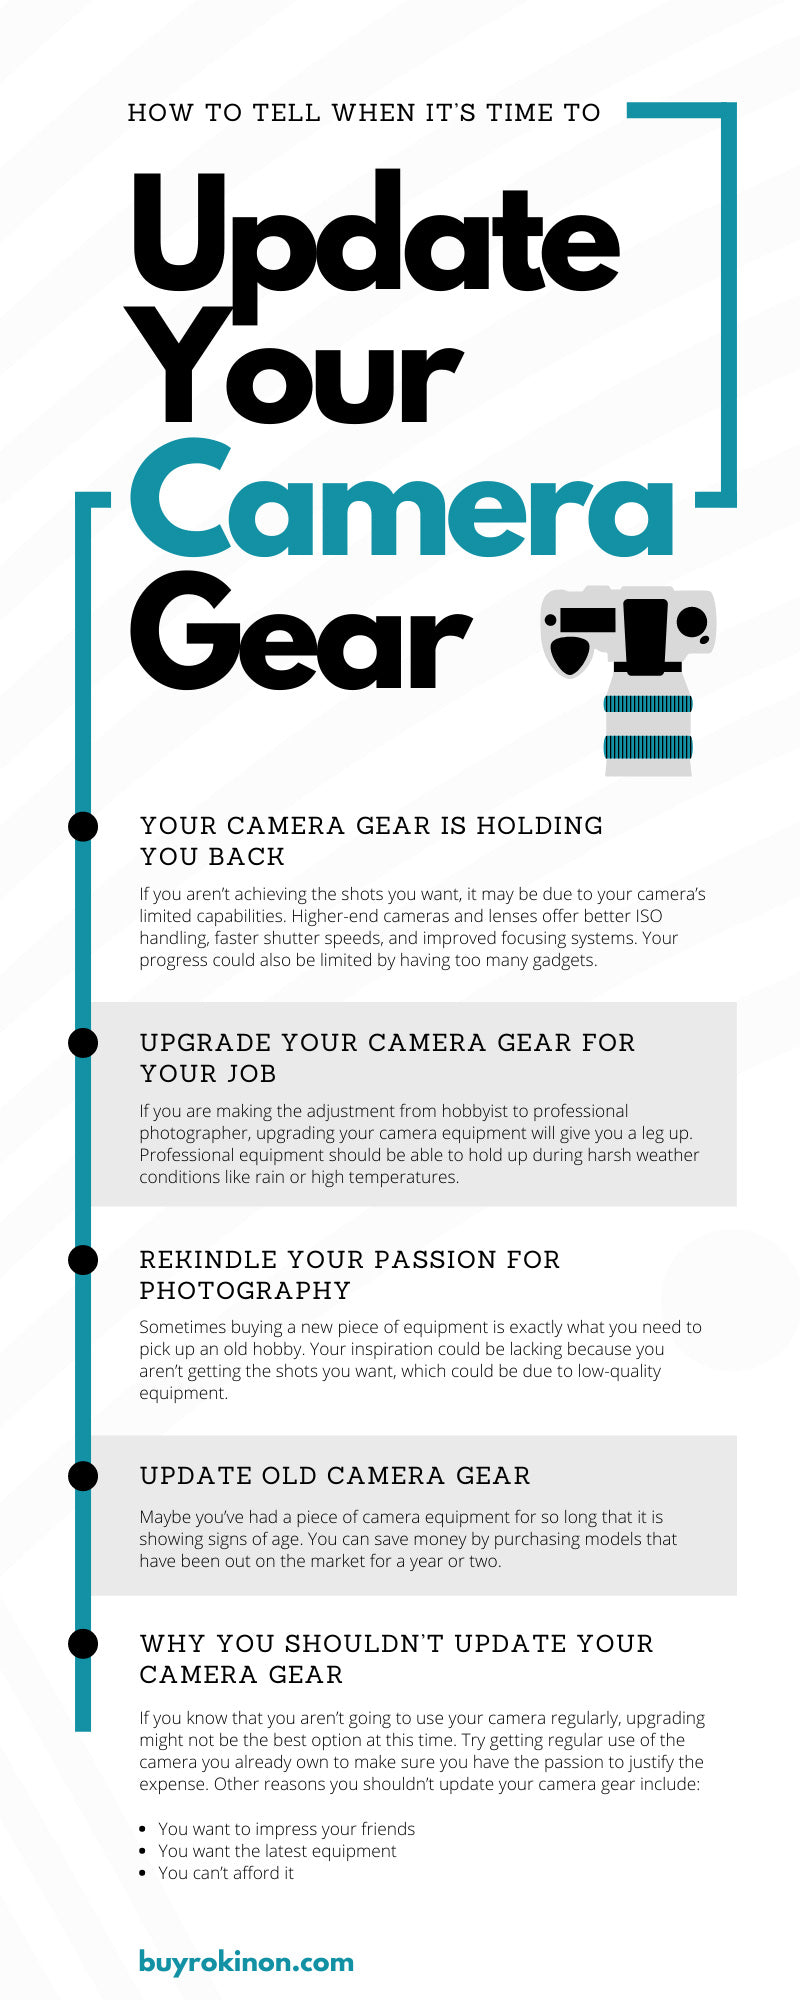 How To Tell When It’s Time To Update Your Camera Gear